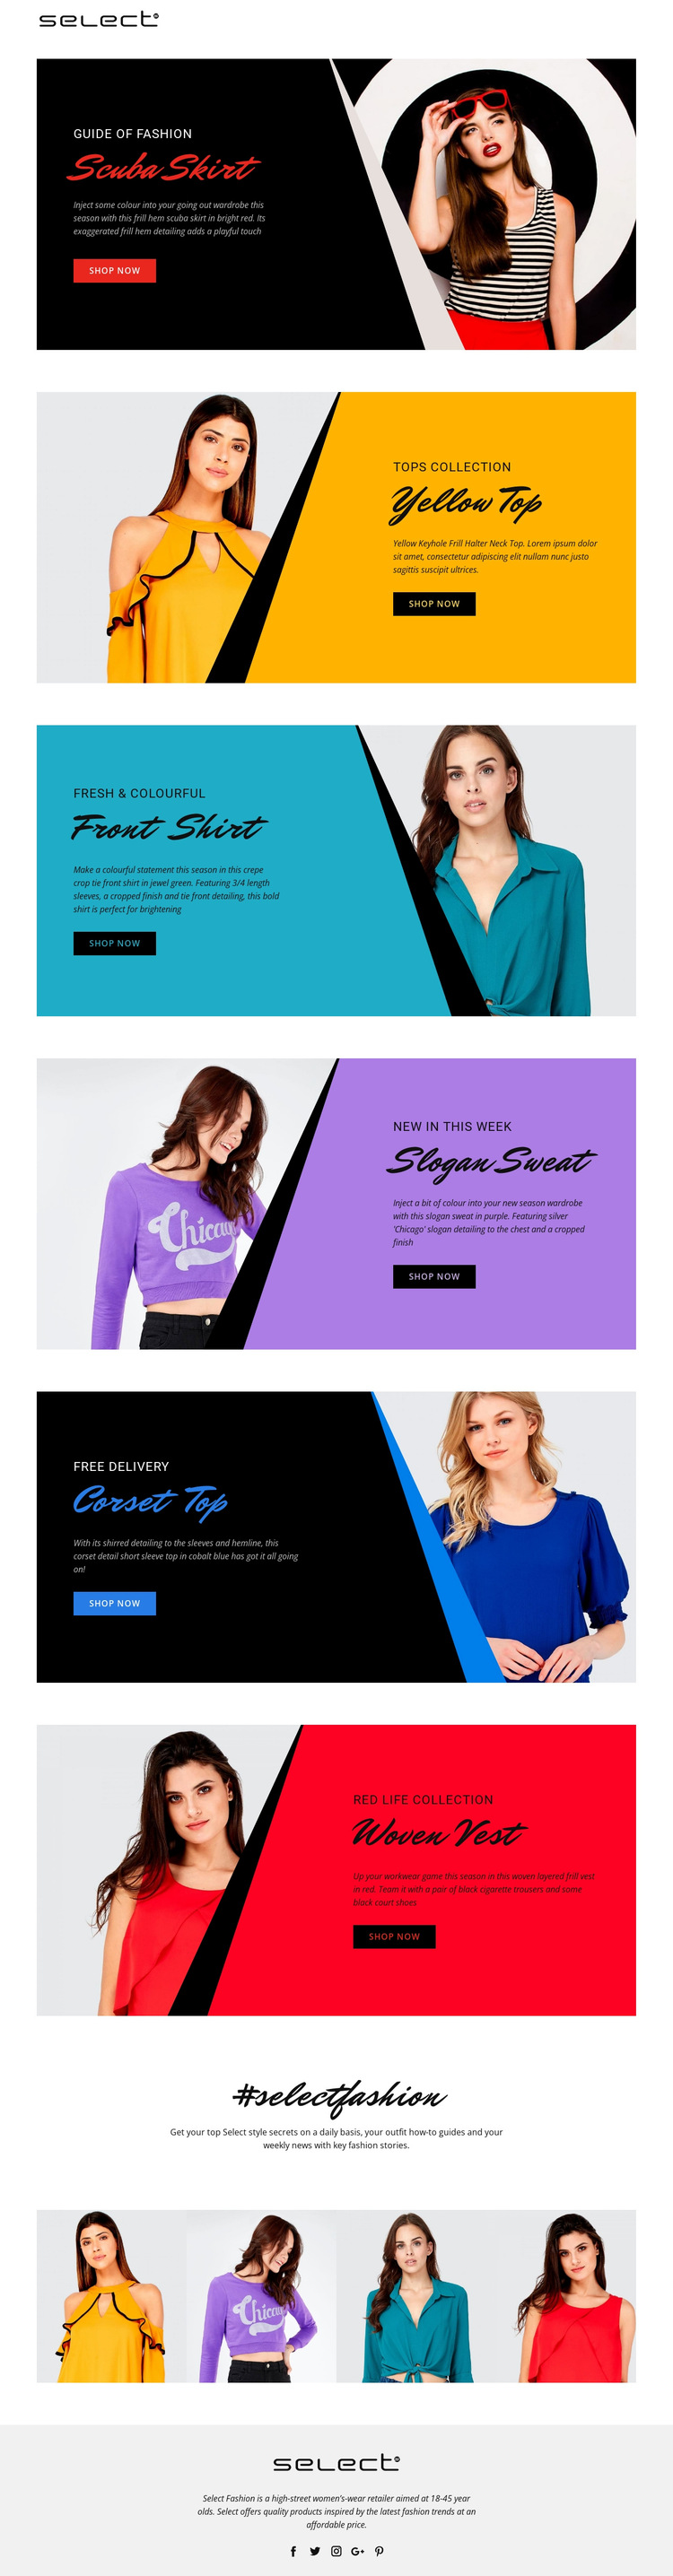 Learn about dress codes HTML5 Template